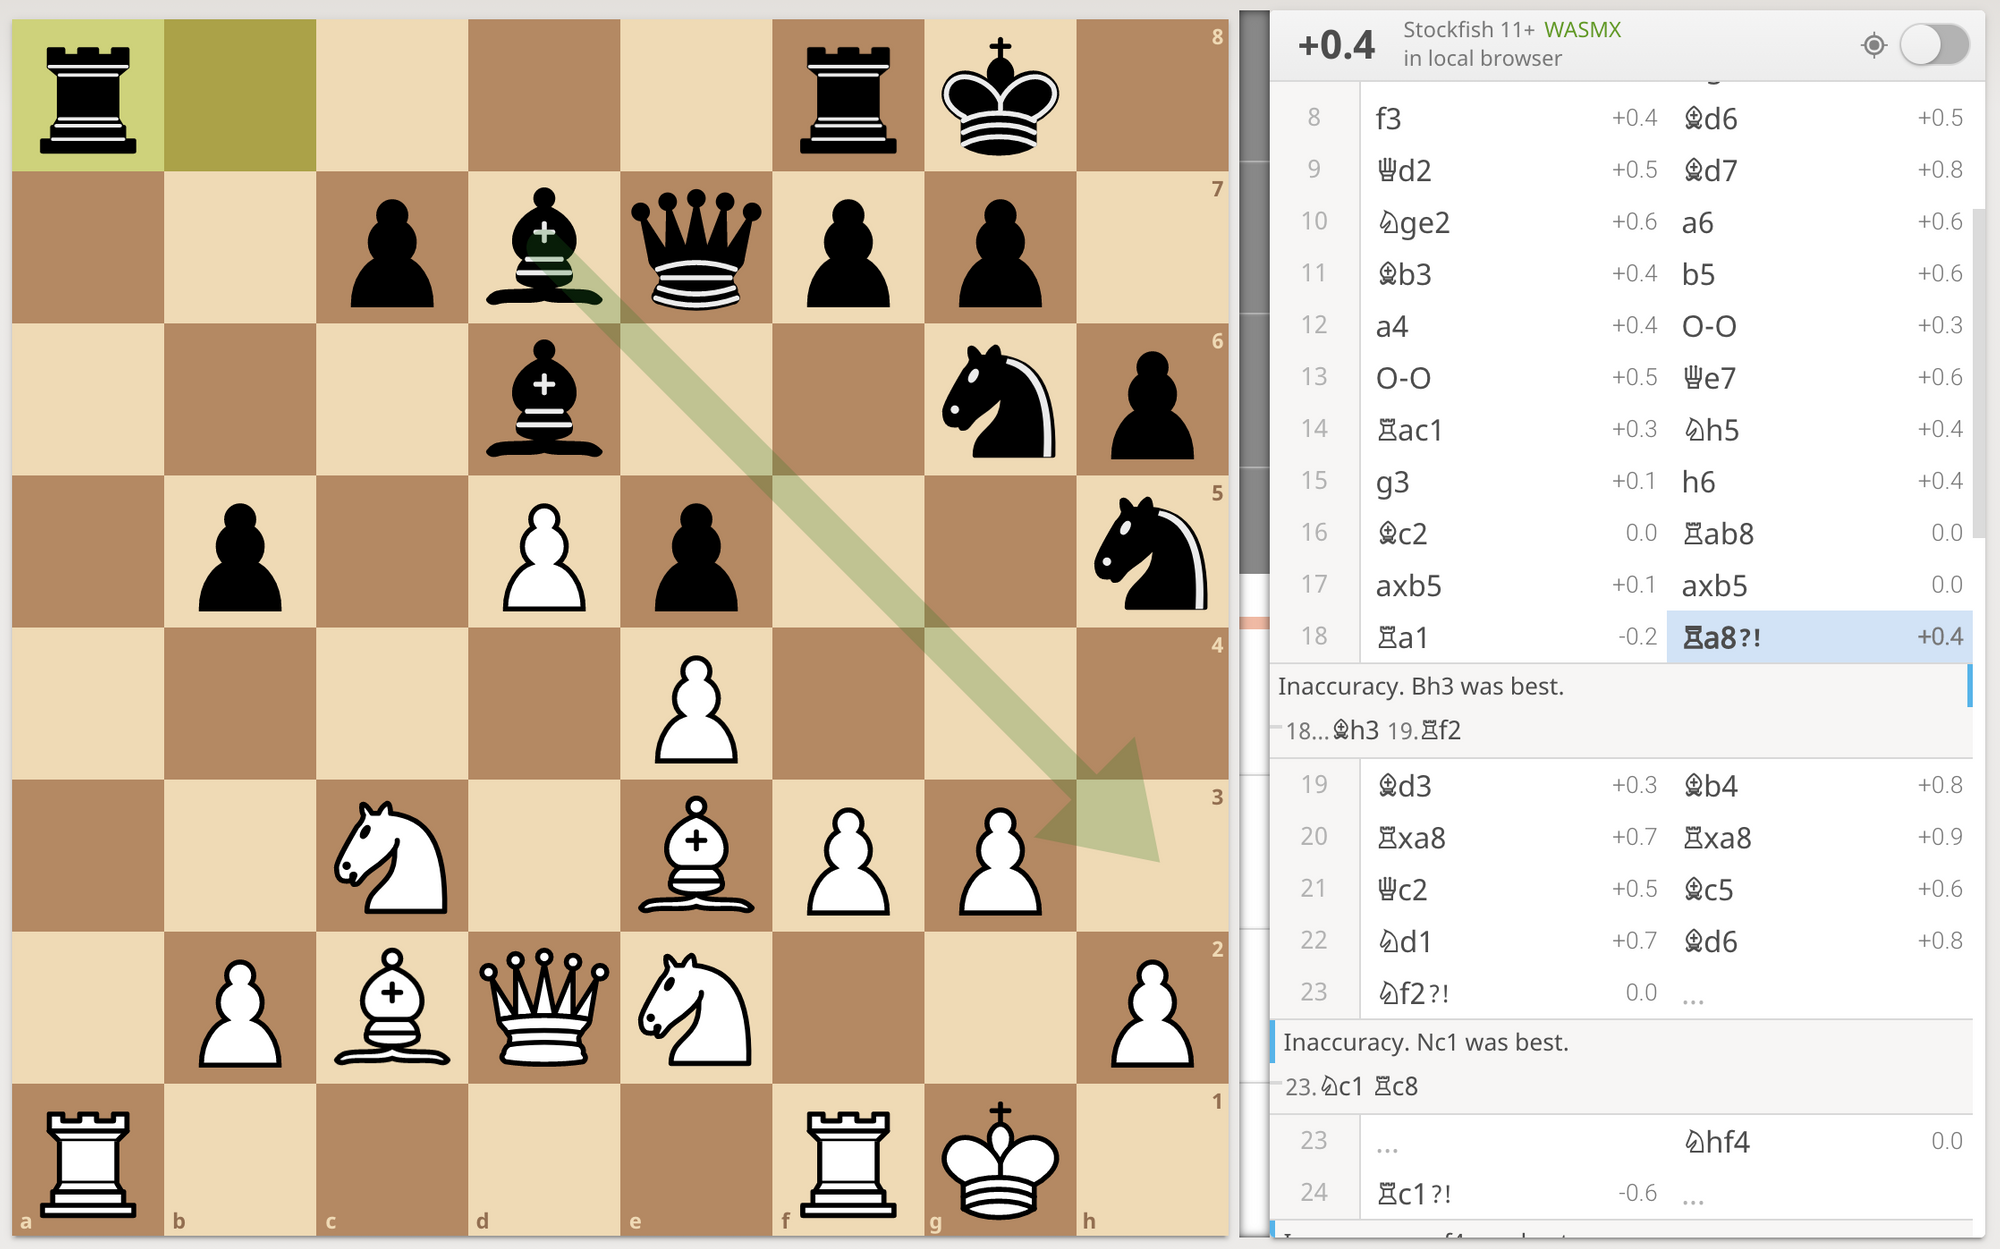 The Queen's Gambit Plays a Beautiful Game